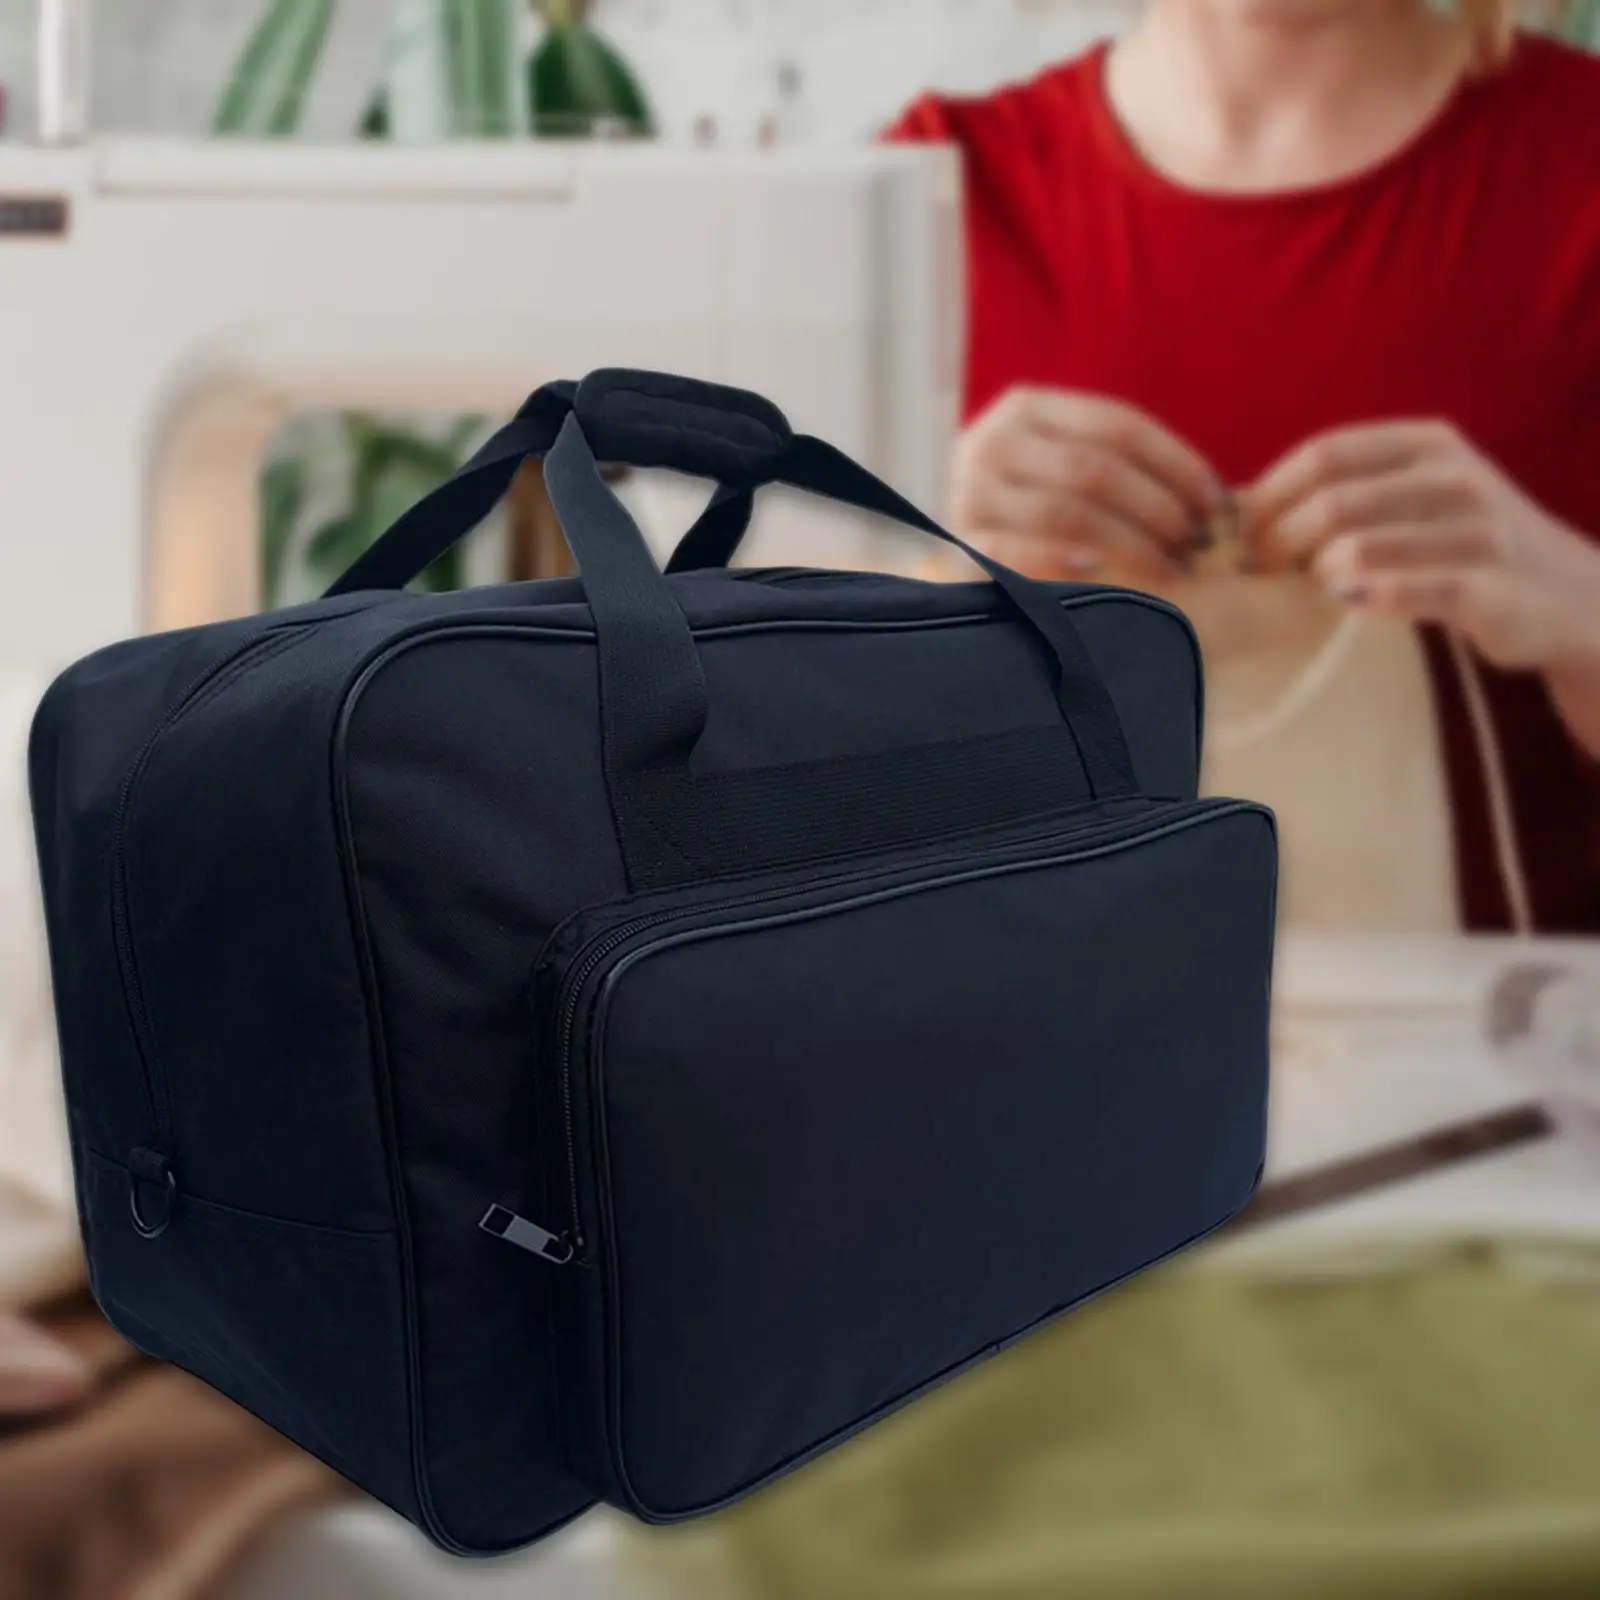 Black Sewing Machine Storage Bag Universal Shoulder Bag Tote Compatible with Most Sewing Machines and Extra Sewing Accessories